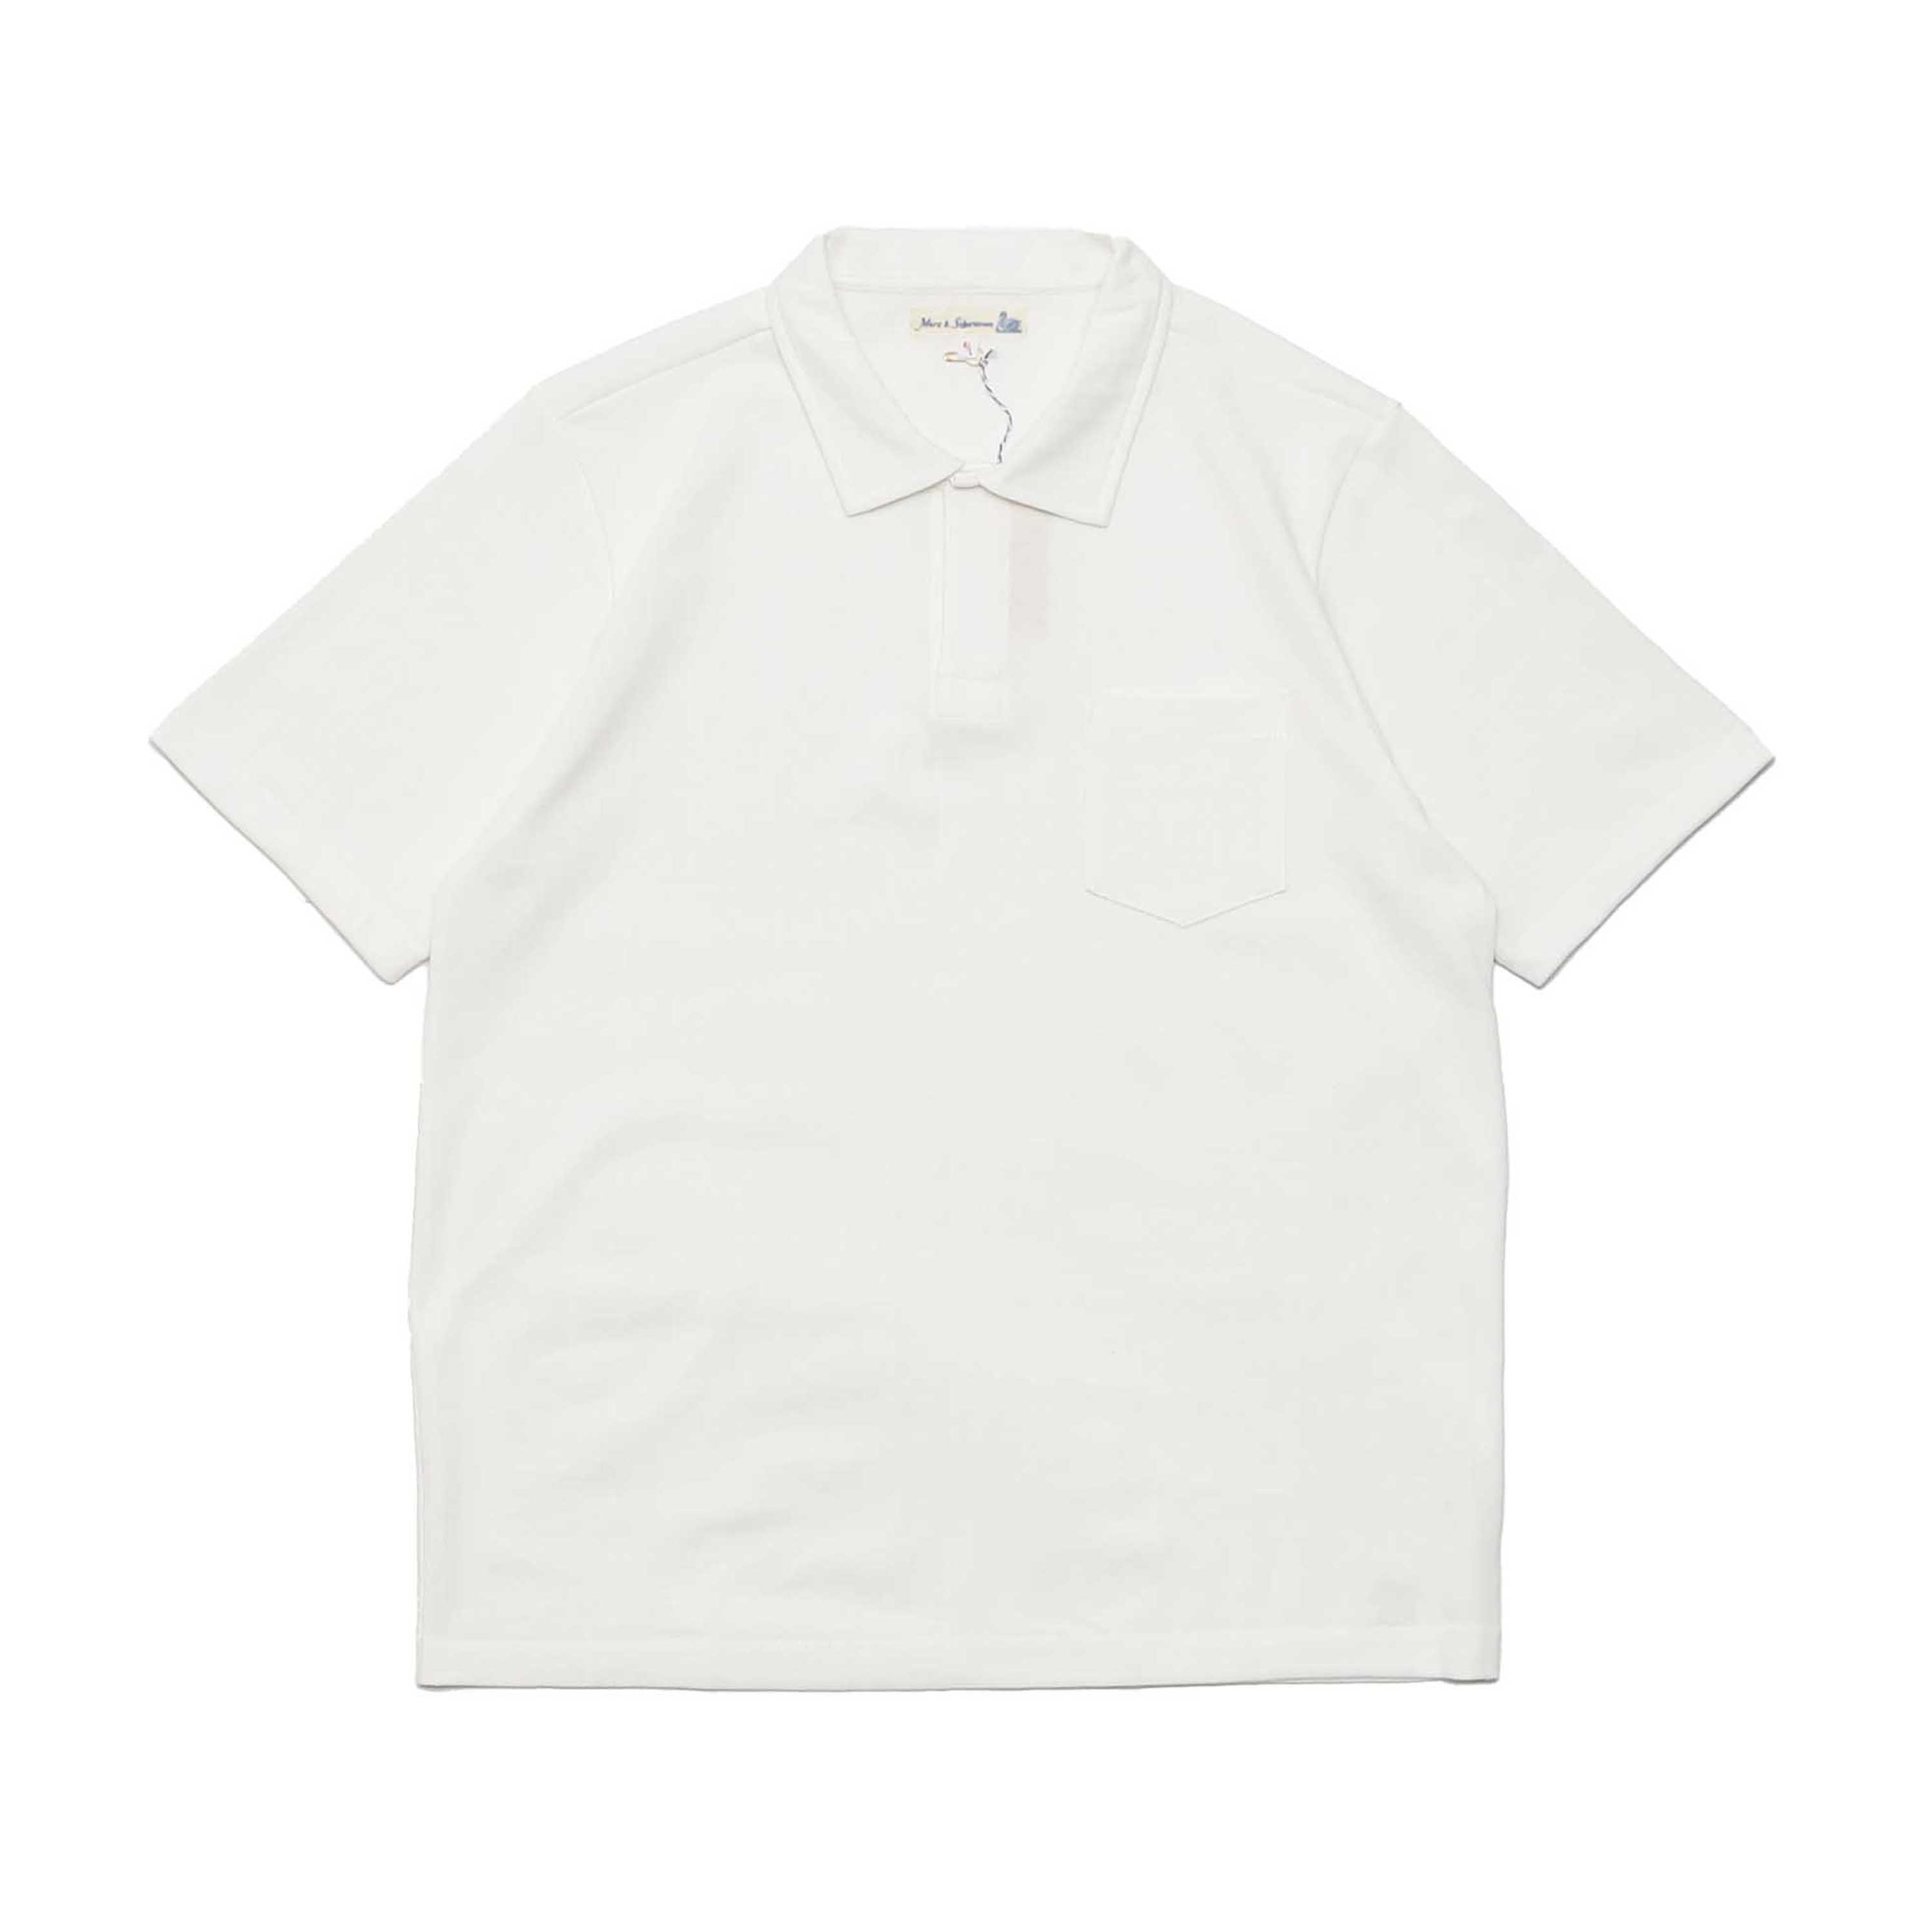 POLO SHIRT WITH POCKET(2PKPL) - WHITE